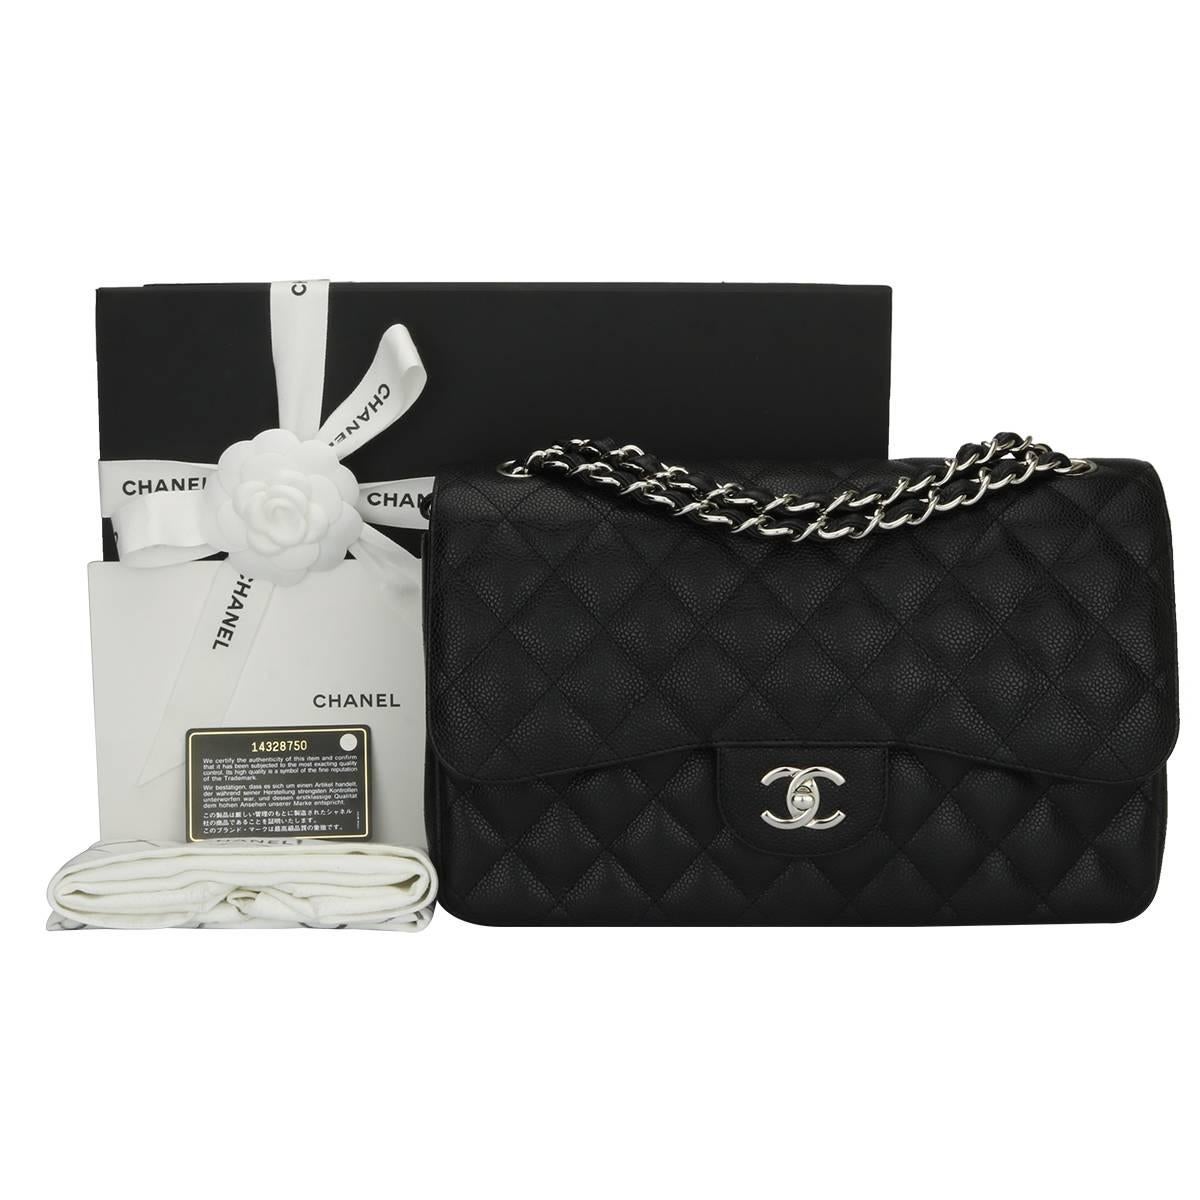 Authentic CHANEL Classic Jumbo Double Flap Black Caviar with Silver Hardware 2010.

This stunning bag is in a mint condition, the bag still holds its original shape, and the hardware is still very shiny.

Exterior Condition: Mint condition, corners